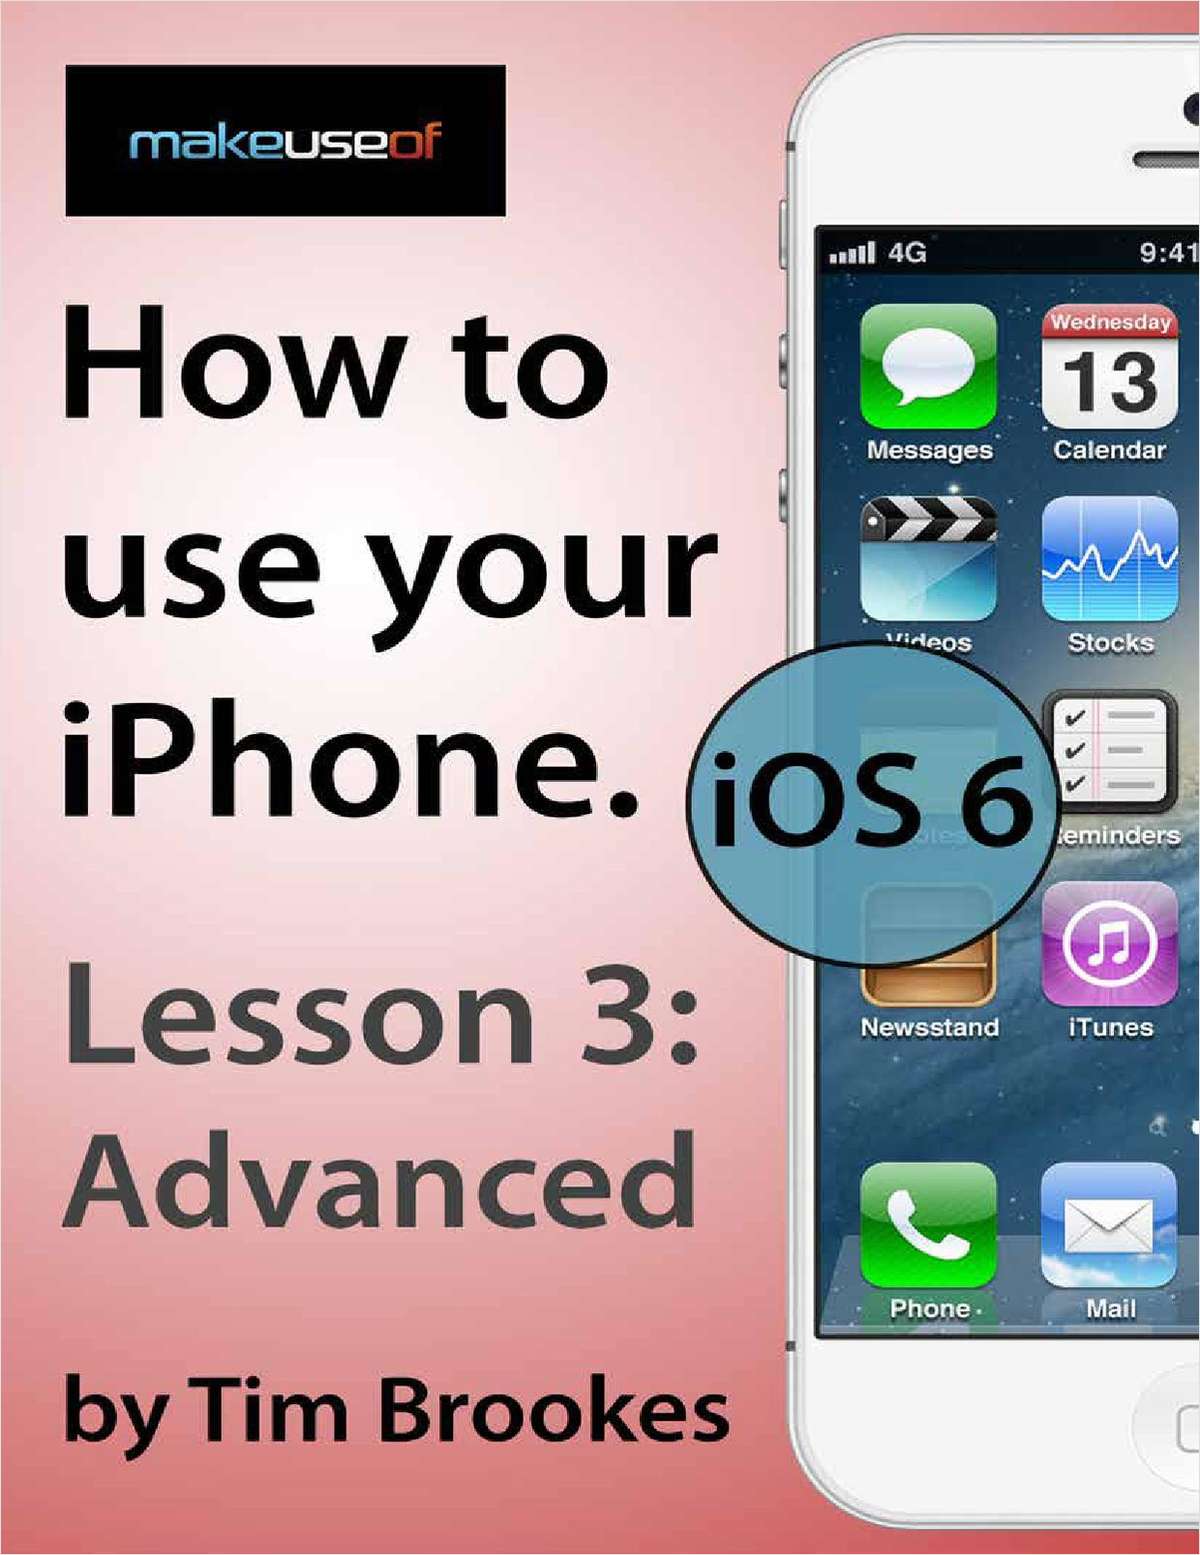 How To Use Your iPhone iOS6: Lesson 3 Advanced